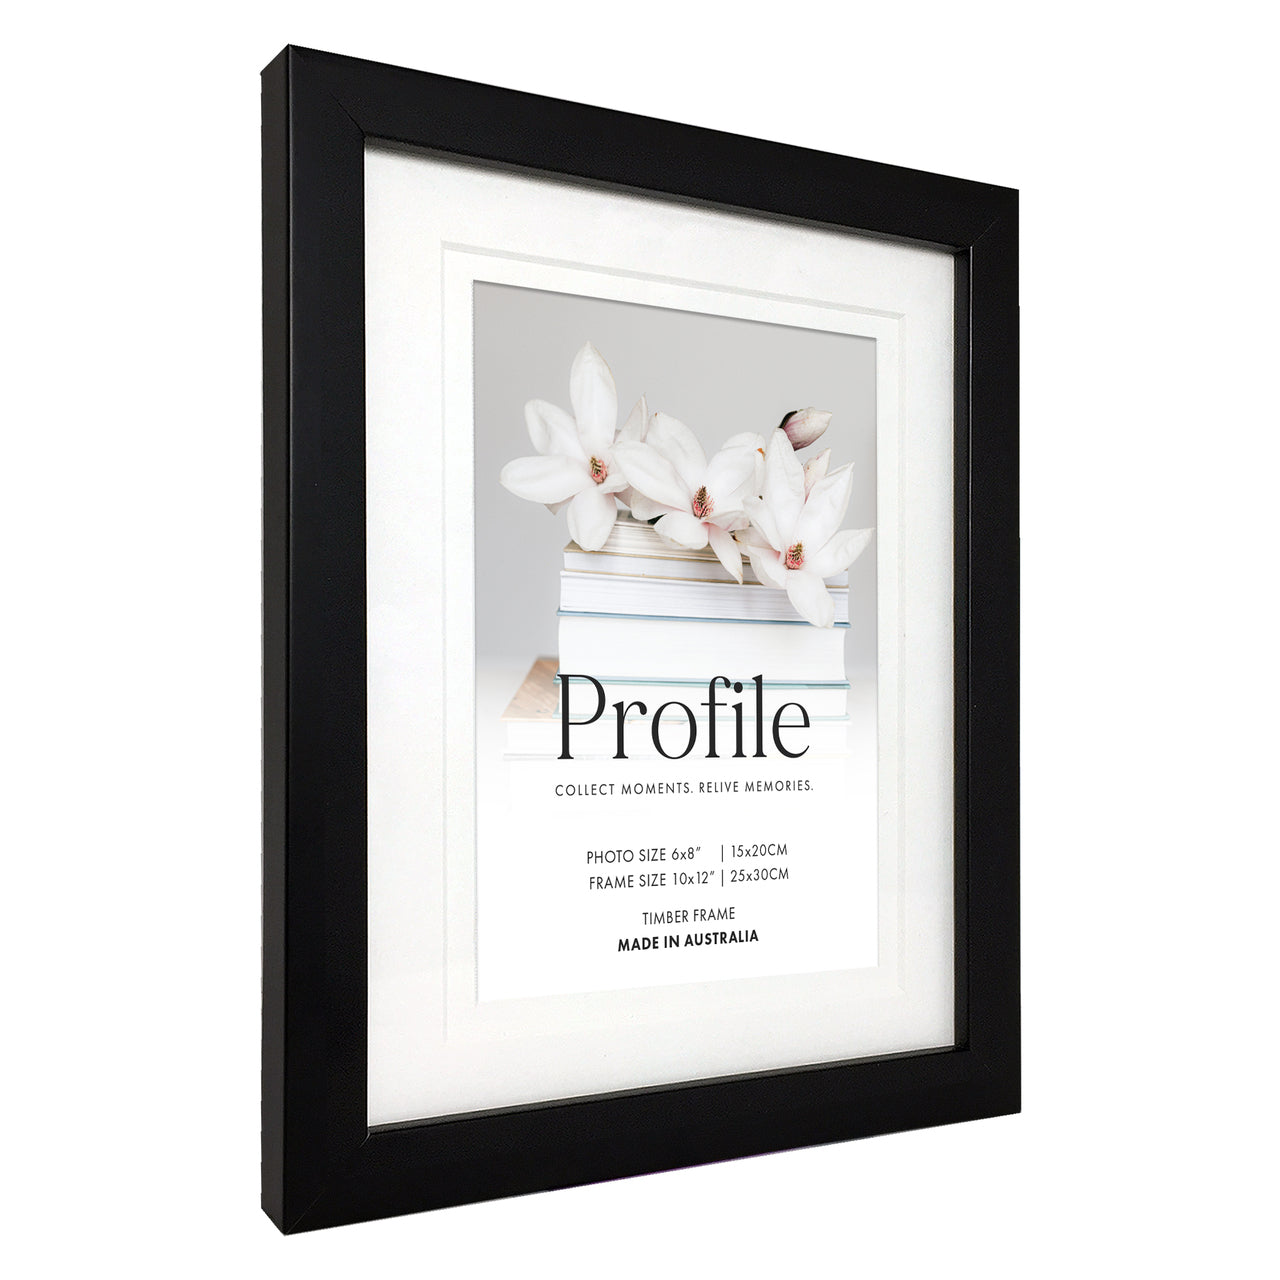 Deluxe Matt Black 8x10 Photo Frame with 5x7 opening